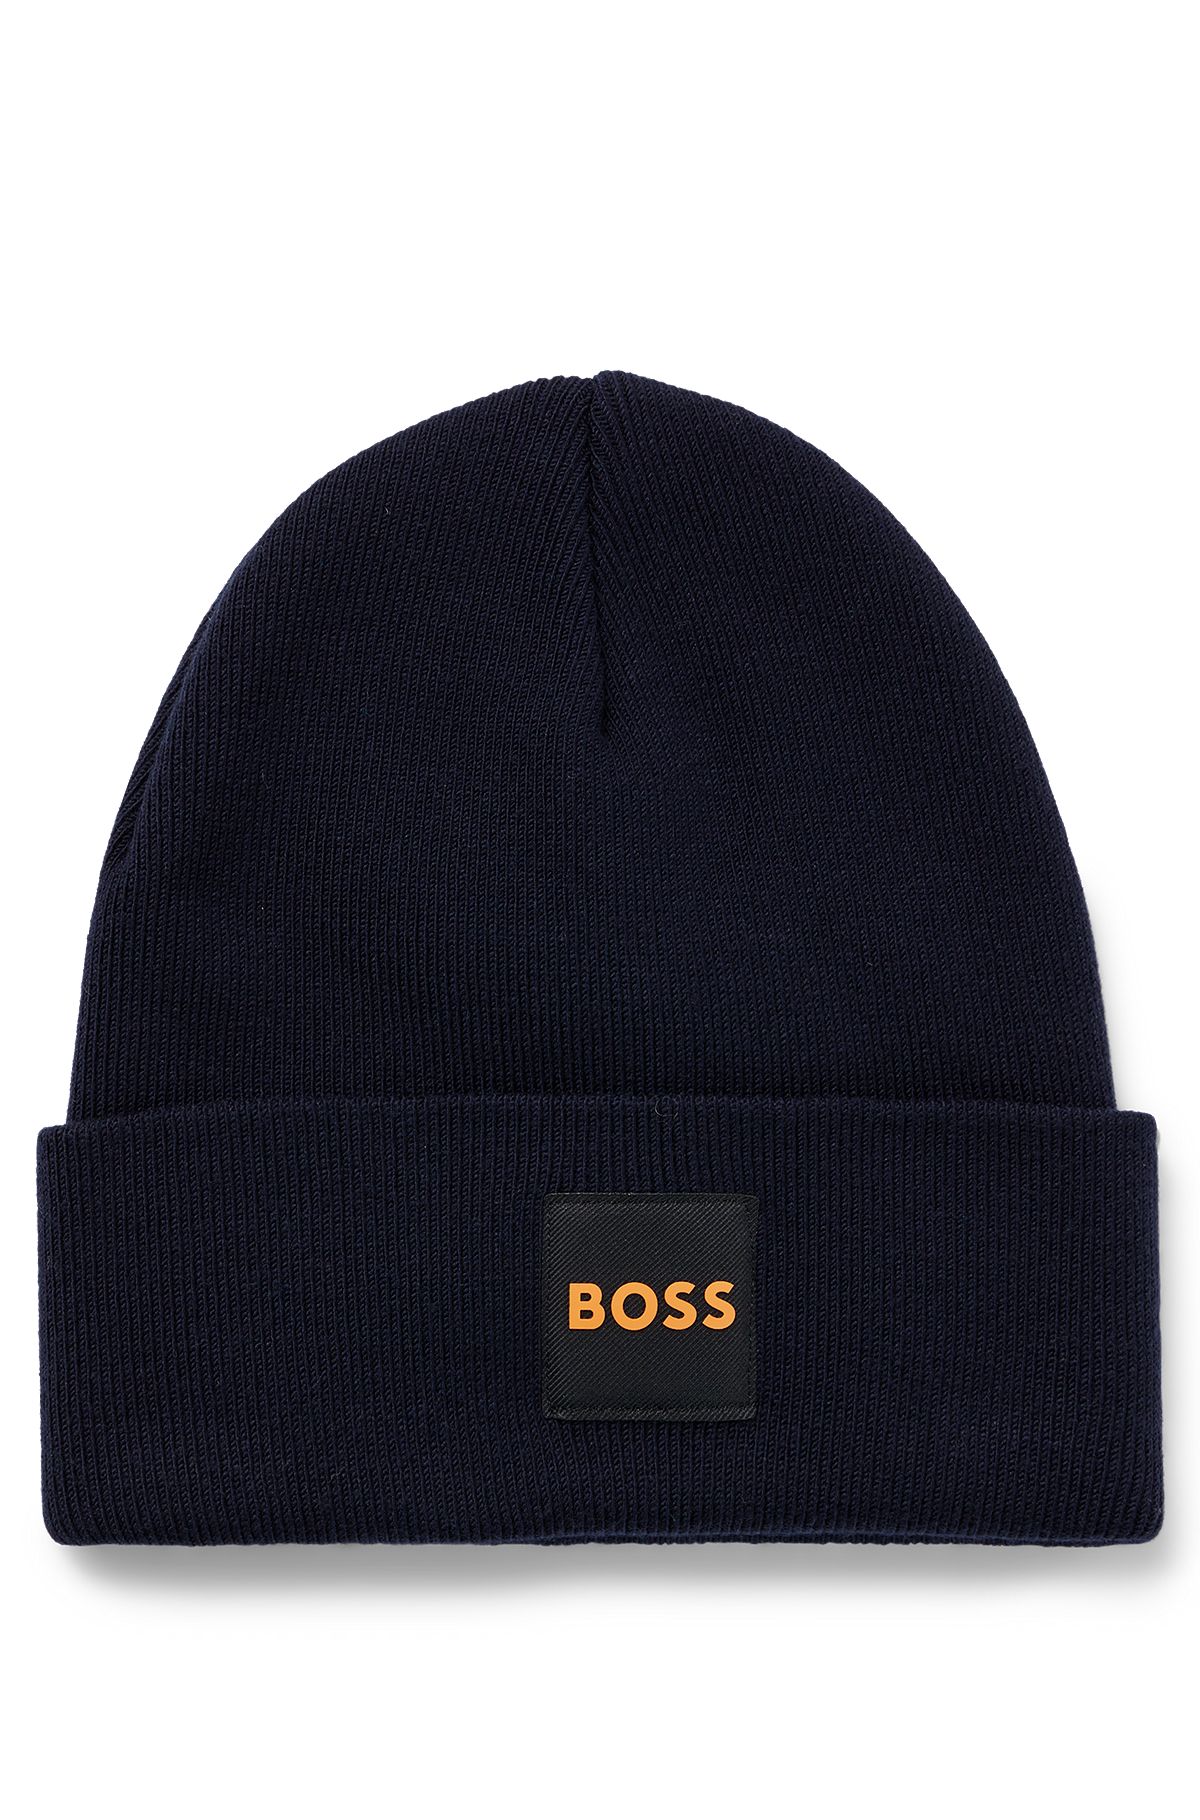 BOSS - Cotton-piqué cap with contrast logo and signature tape